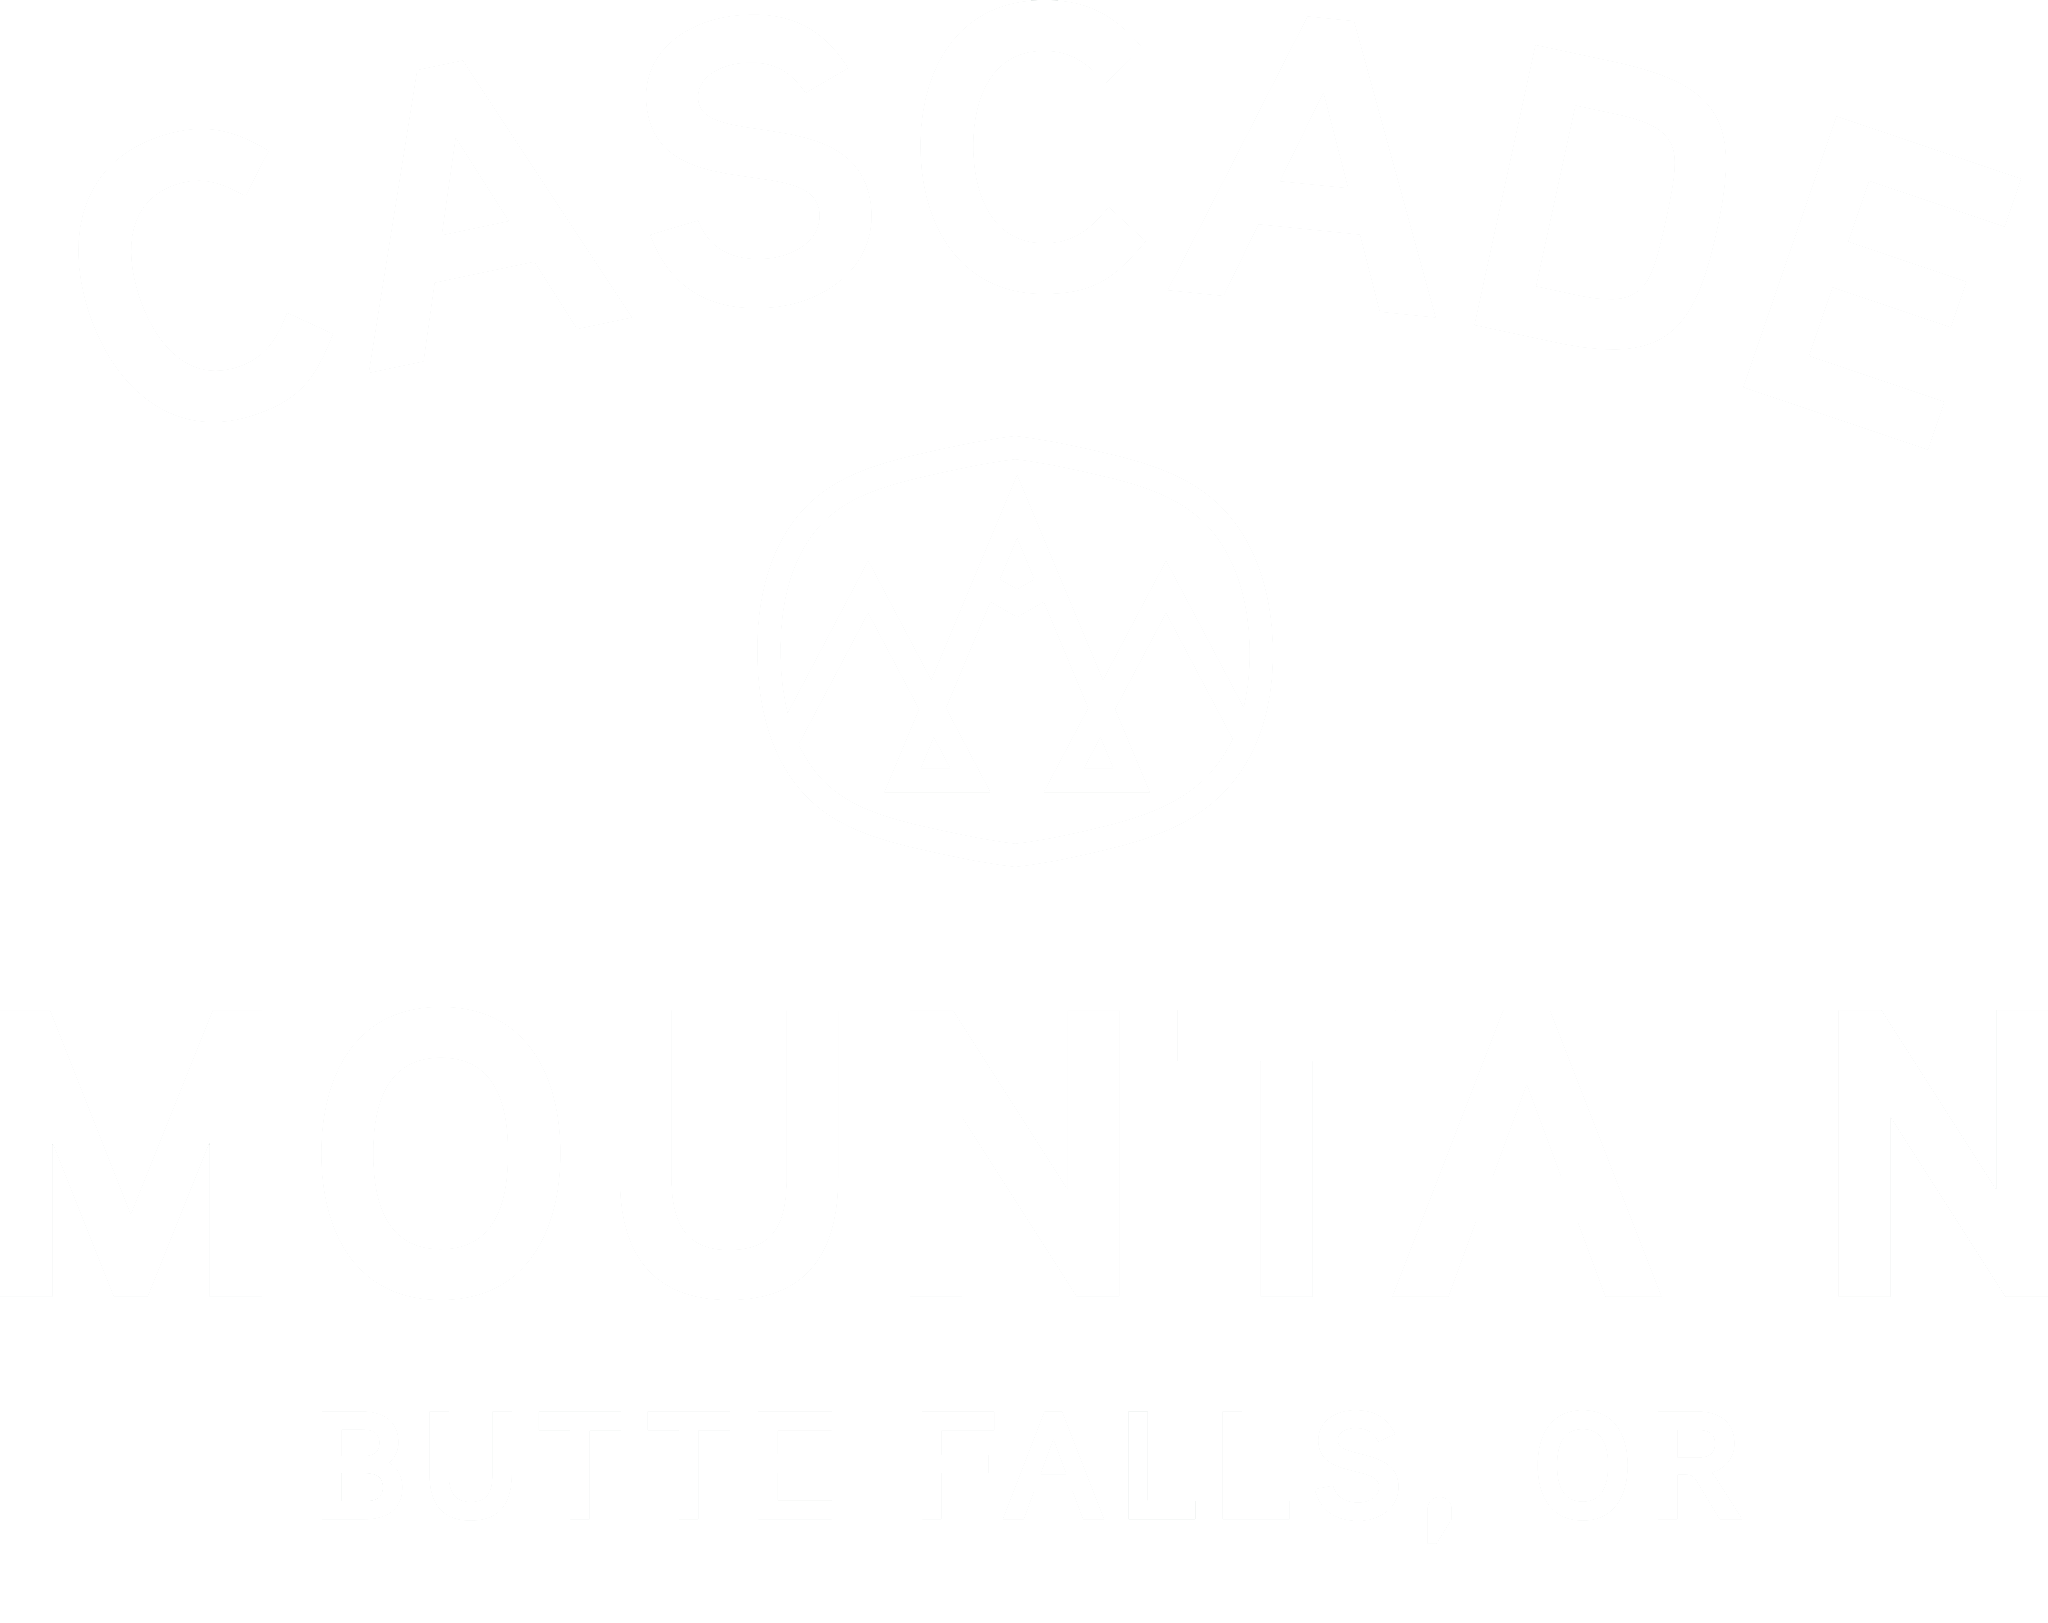 cascade-white.png